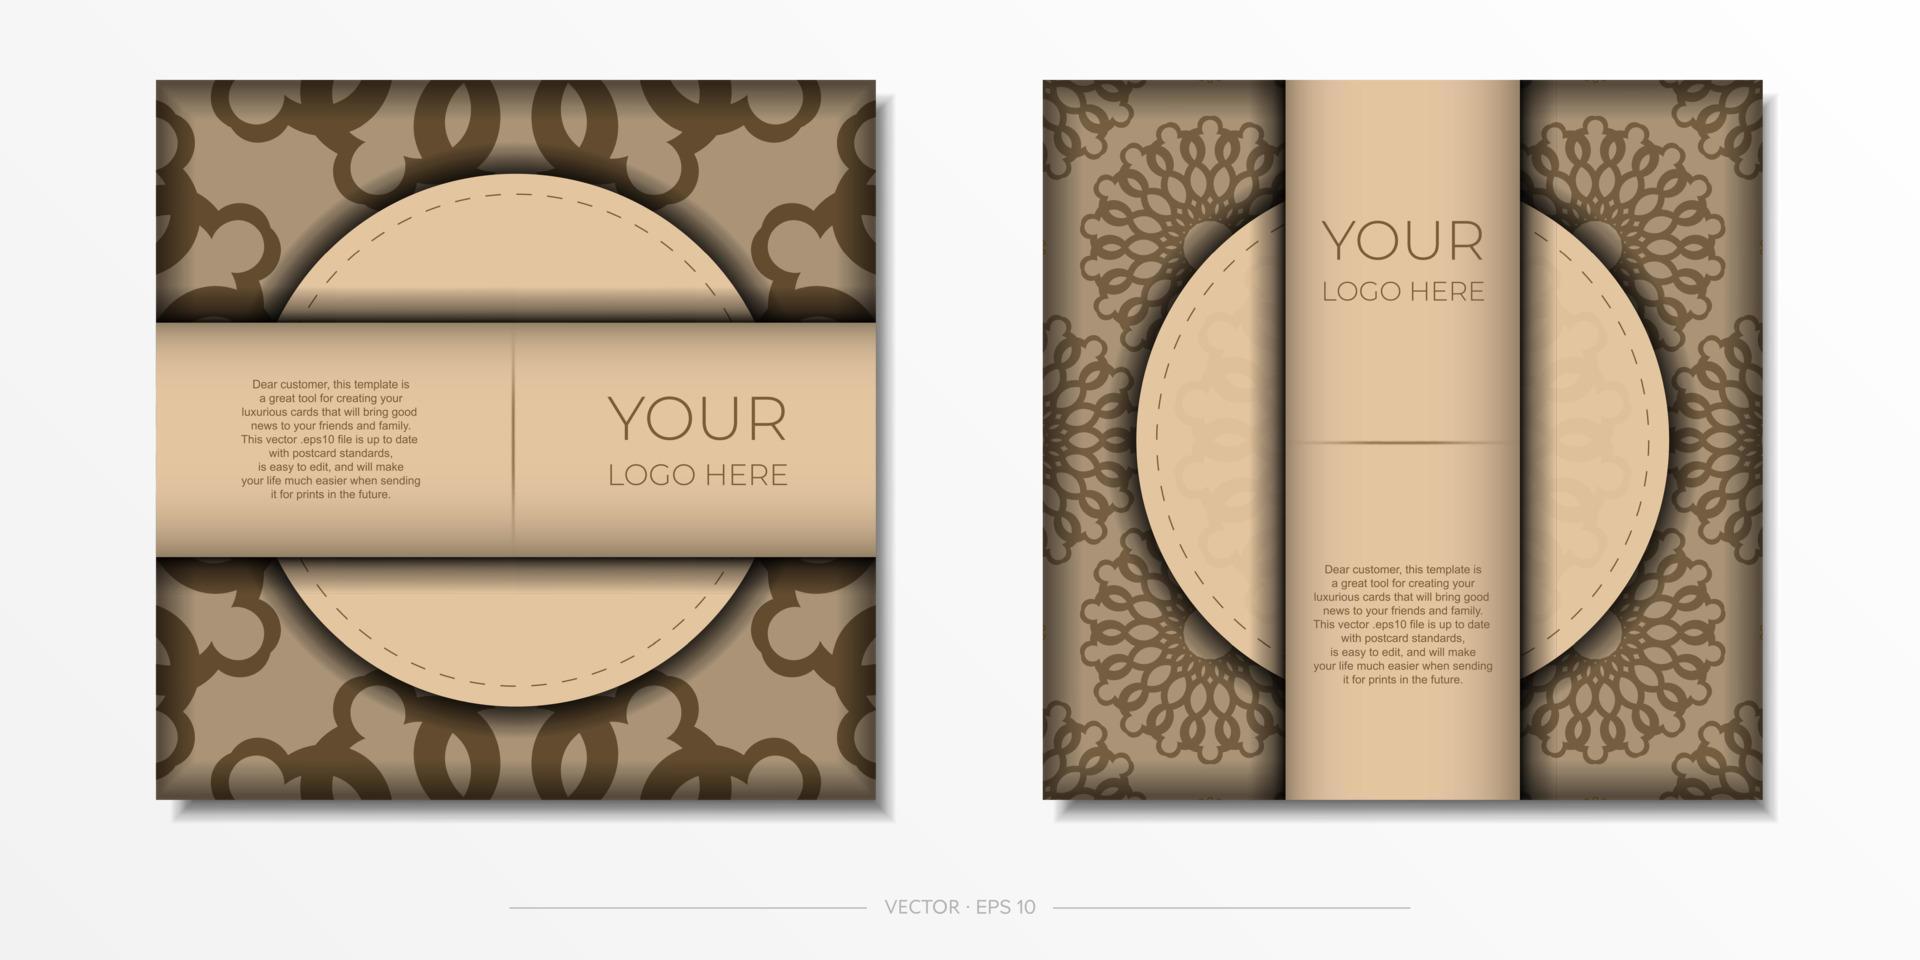 Vector invitation card with place for your text and abstract patterns. Ready-to-print design of a postcard in Beige color with mandala patterns.